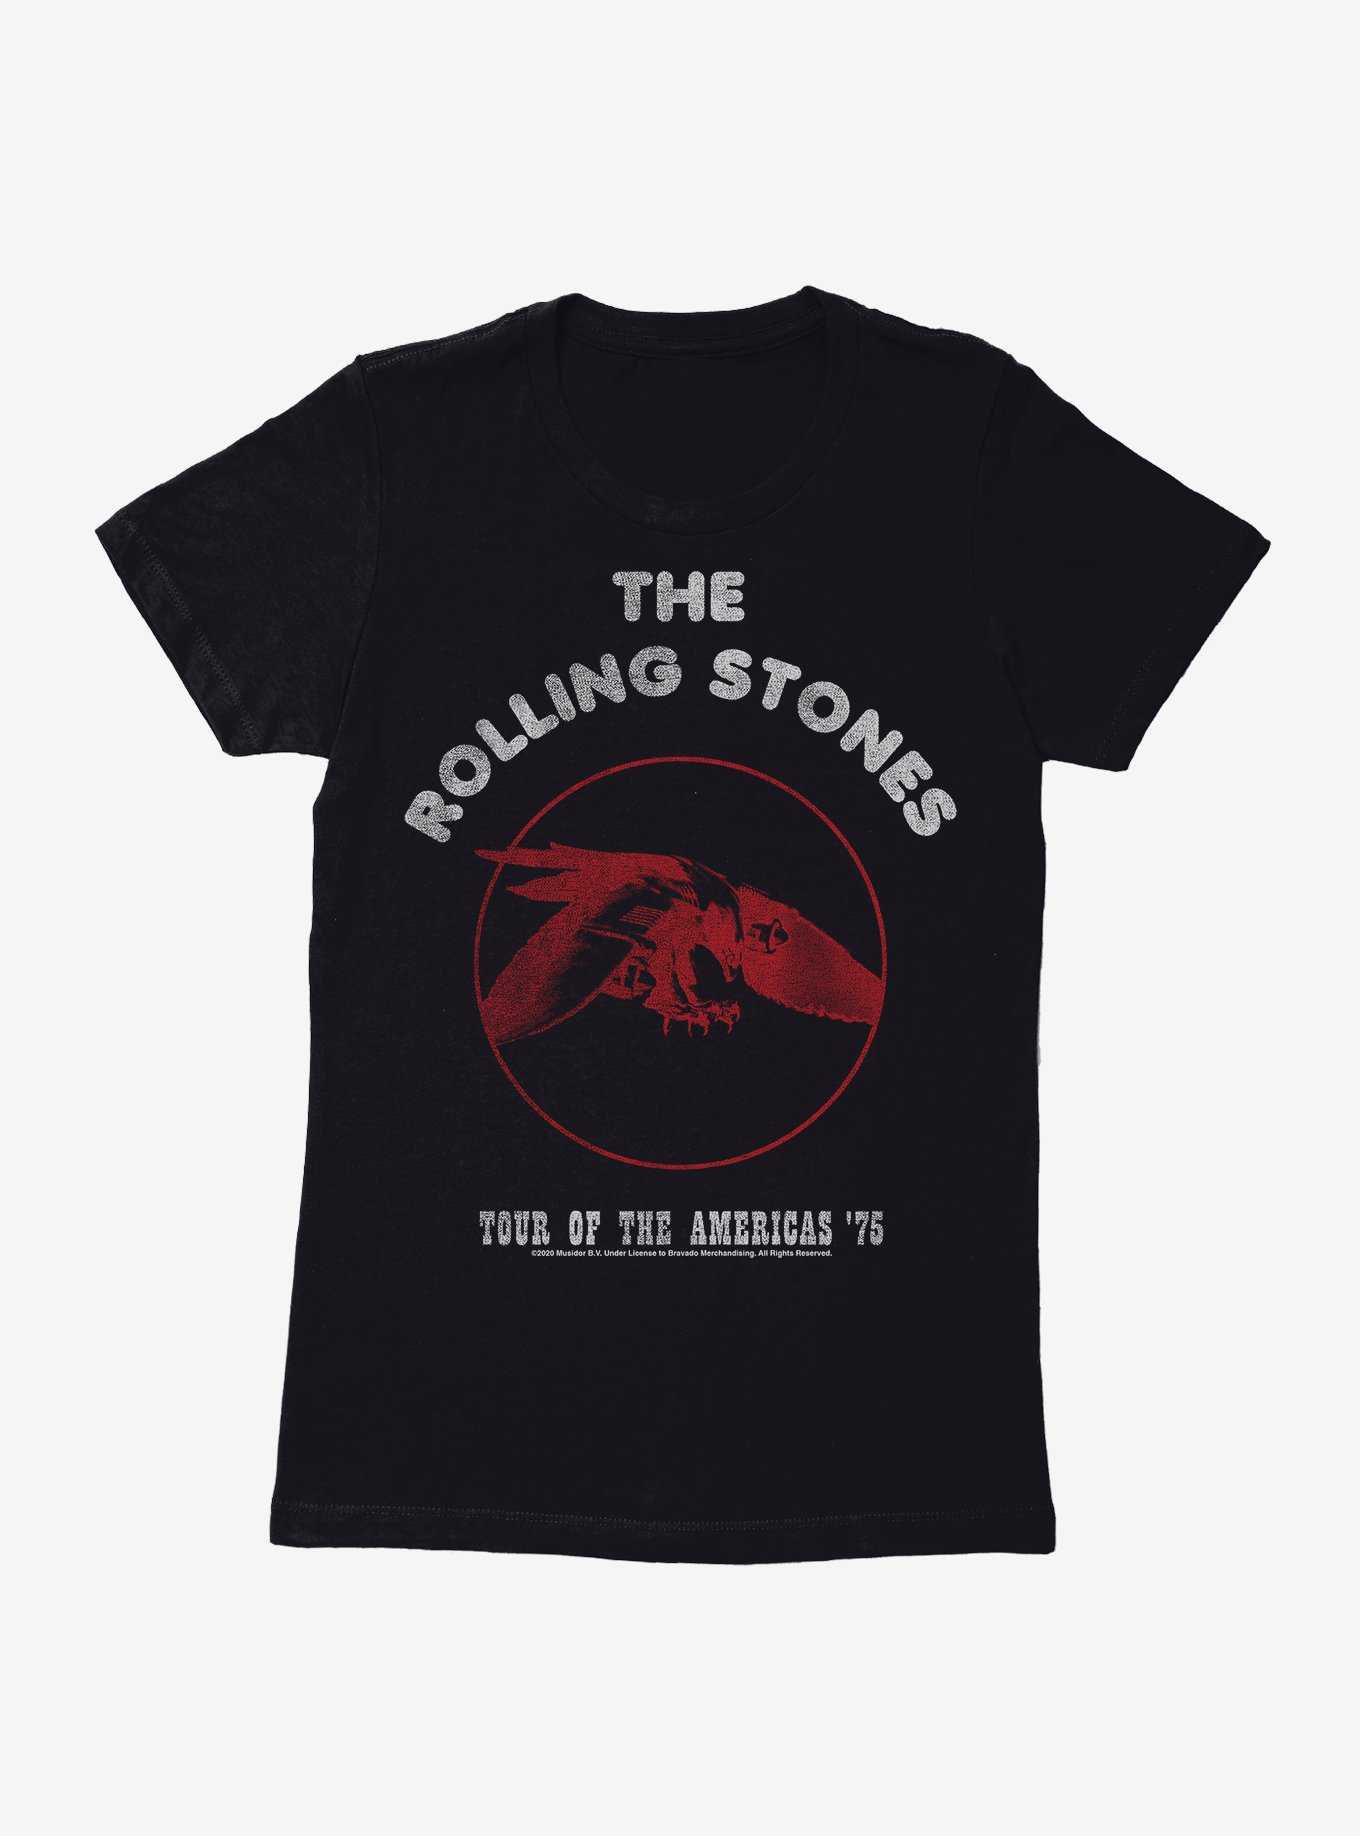 The Rolling Stones Tour Of The Americas '75 Womens T-Shirt, , hi-res